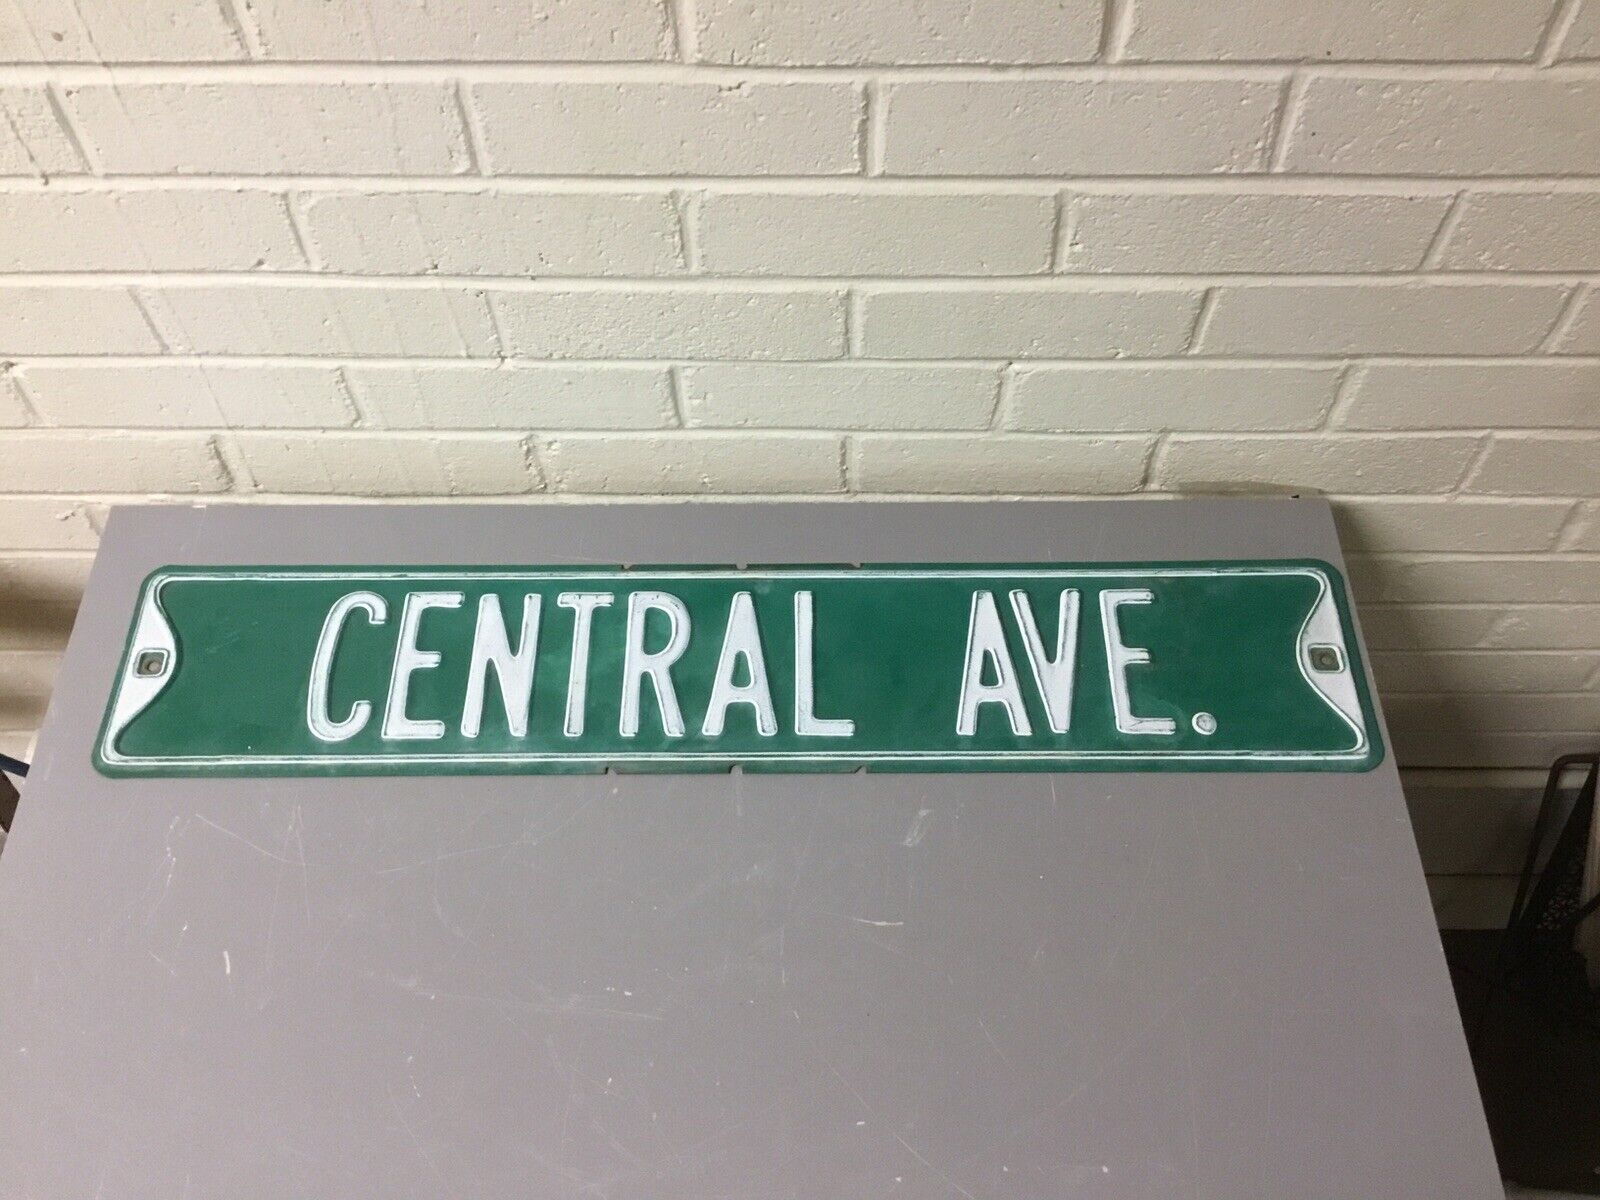 VINTAGE METAL RAISED LETTER STREET SIGN “CENTRAL AVE” 30” 2 AVAILABLE